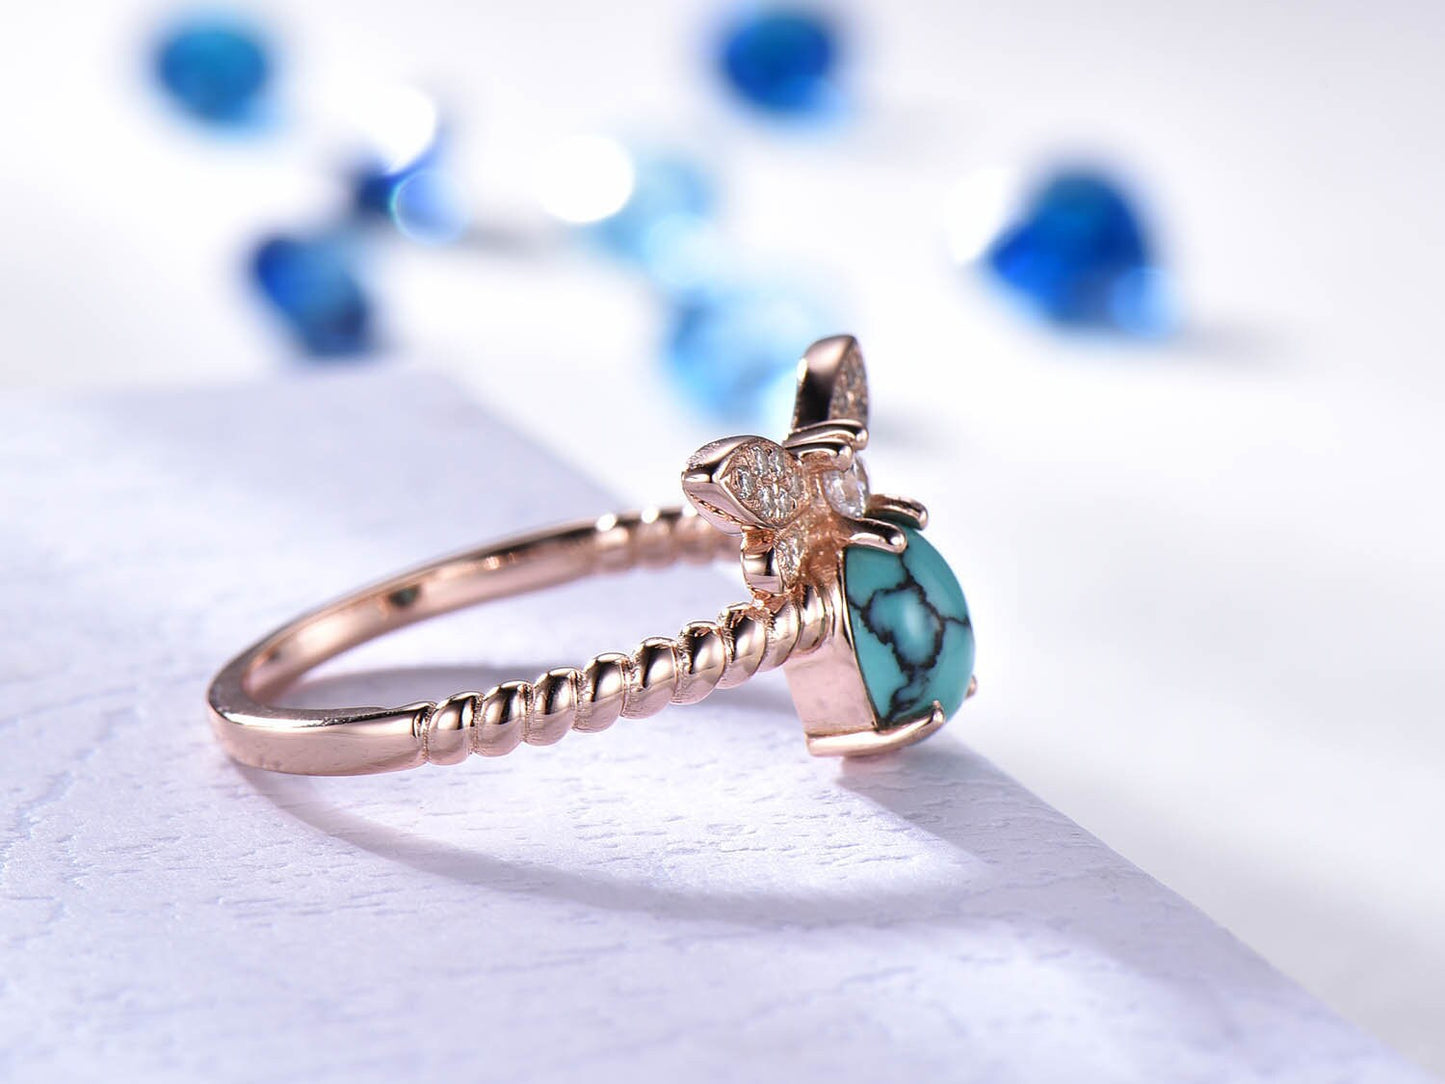 Turquoise ring for women rose gold turquoise diamond engagement ring butterfly unique design bridal promise jewelry Valentine gift 14k/18k